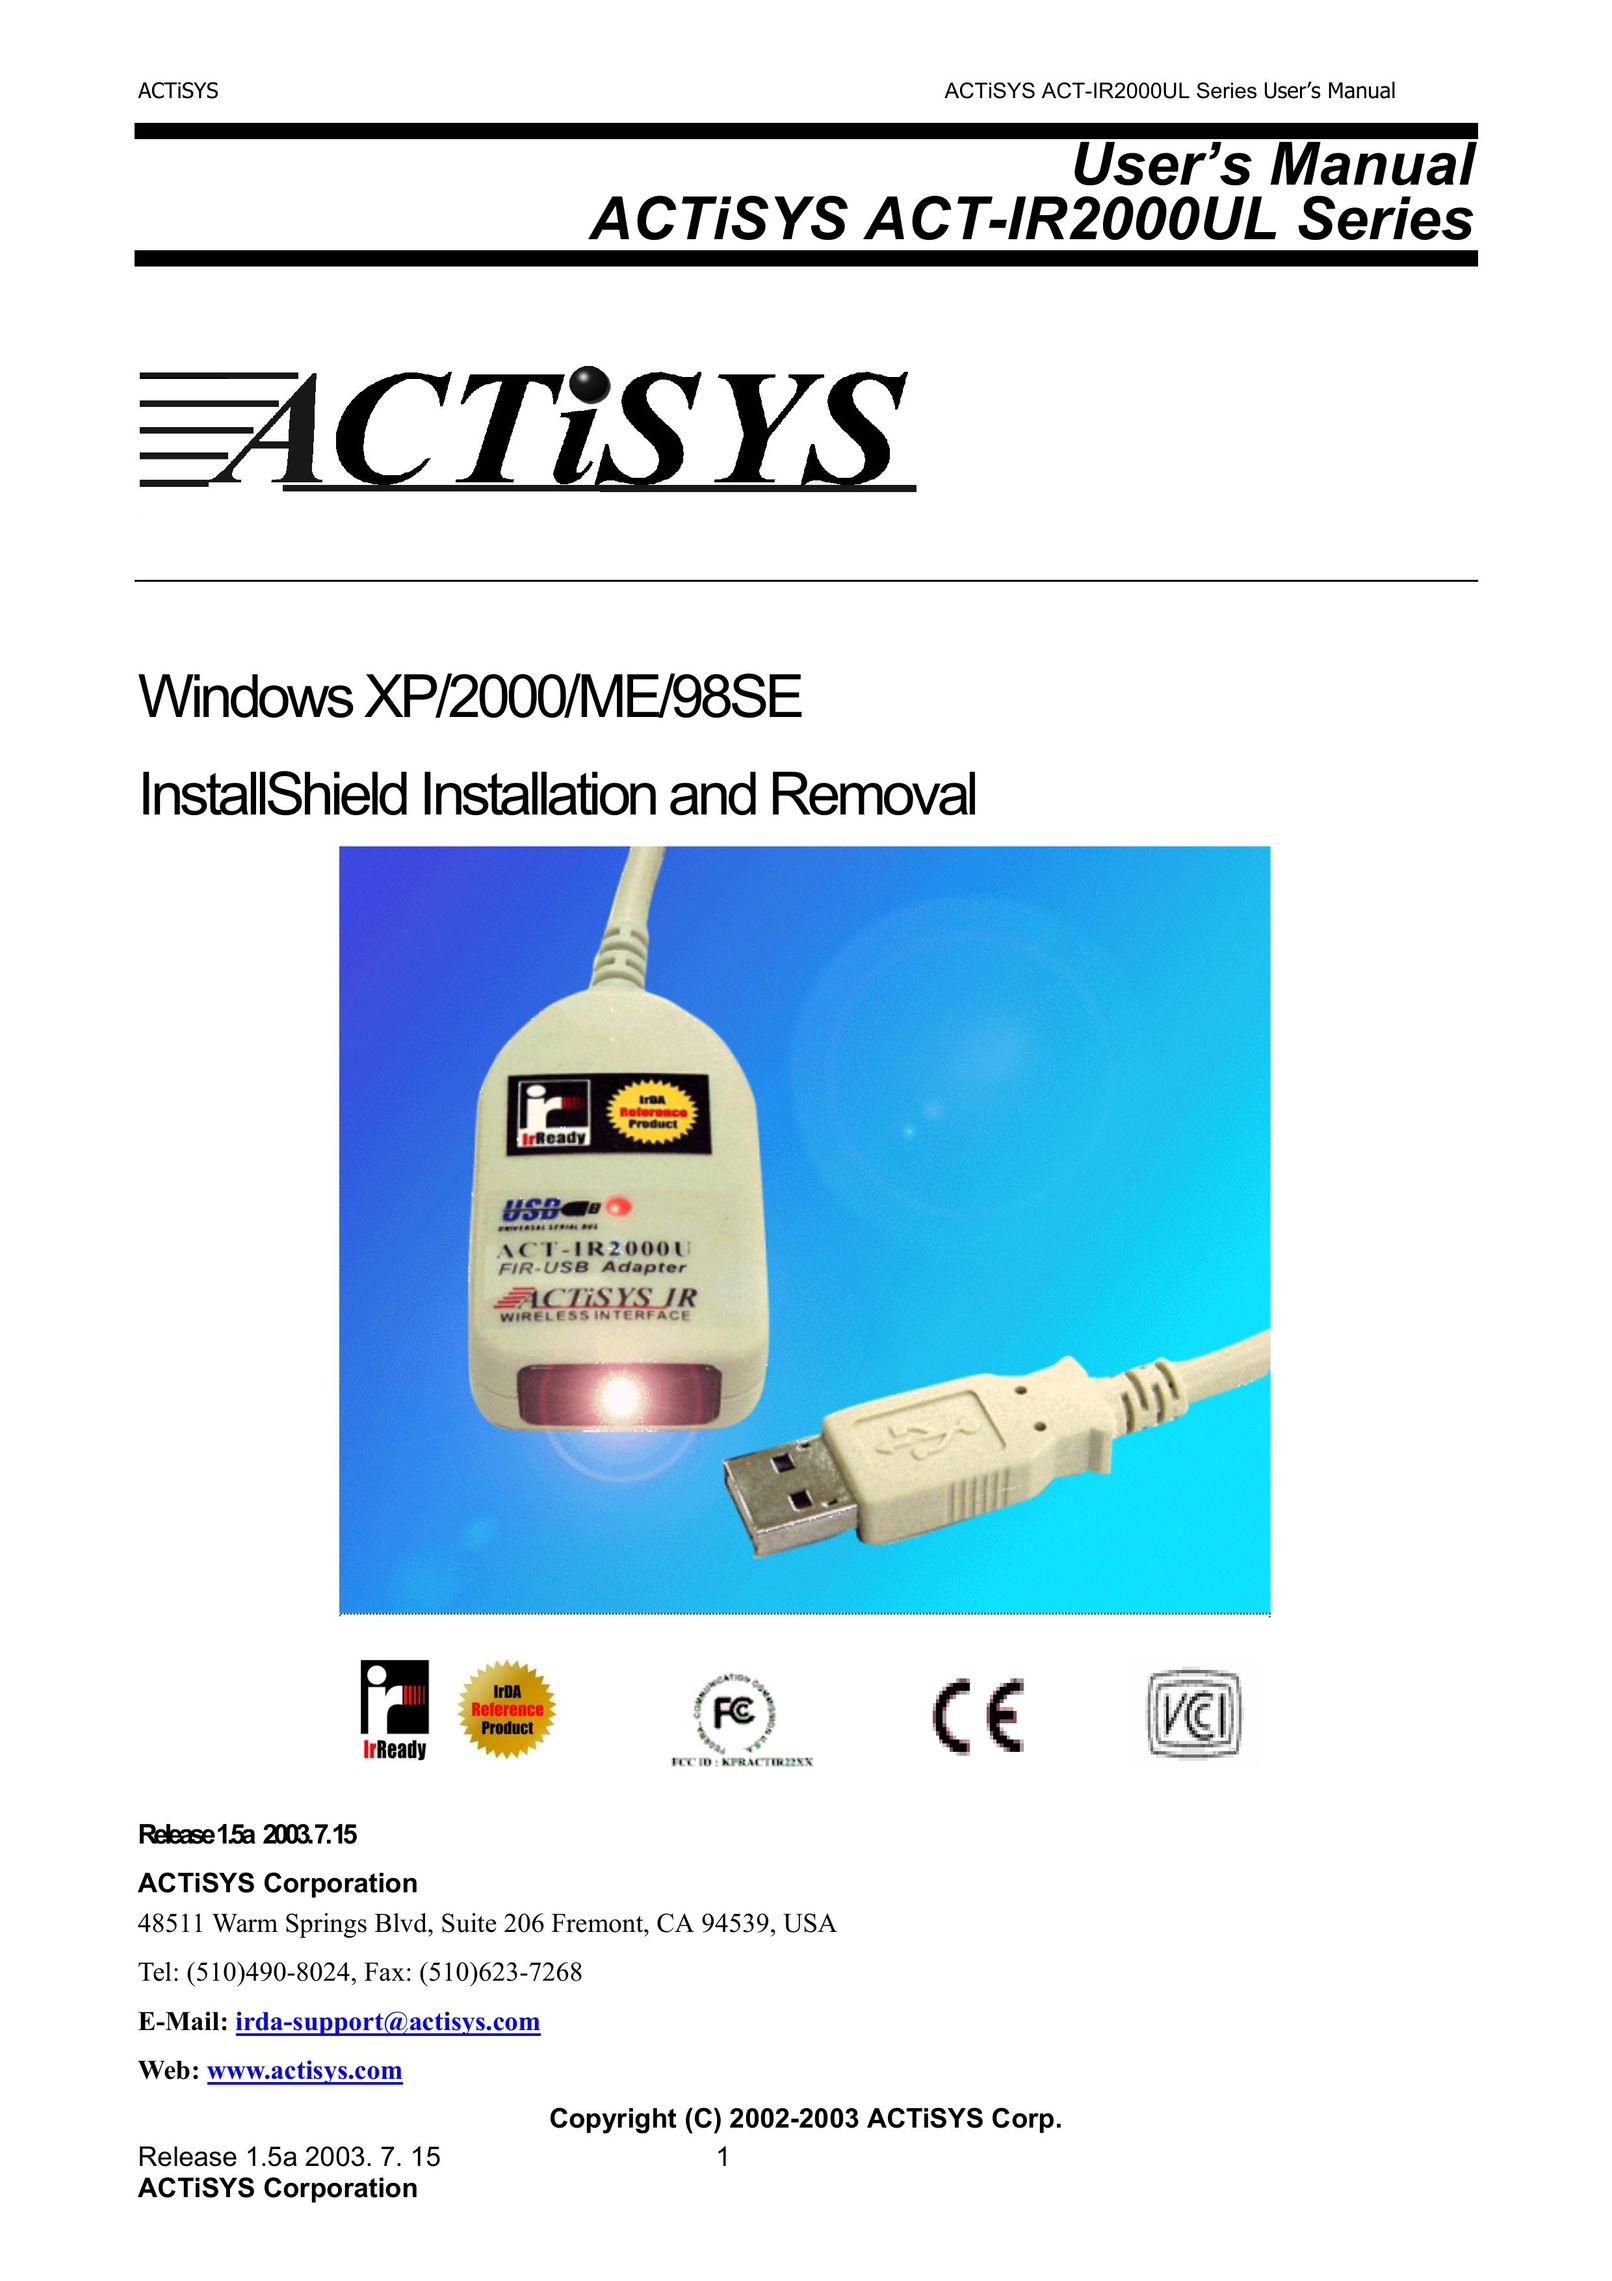 ACTiSYS Fast Infrared USB Adapter Computer Accessories User Manual (Page 1)